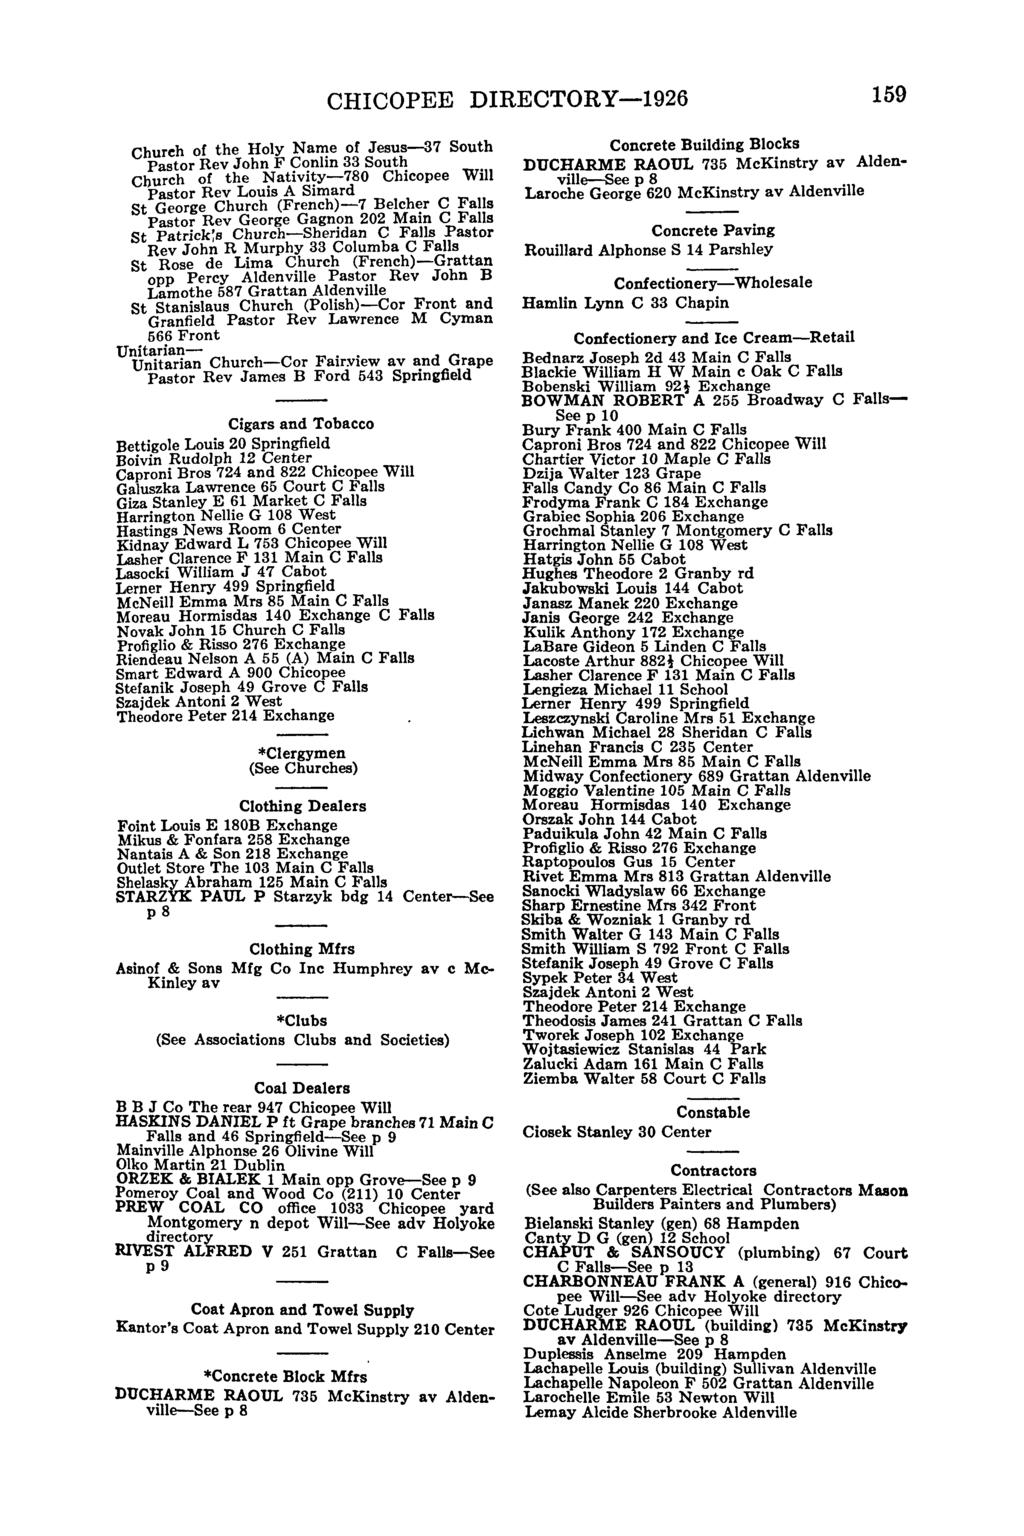 CHICOPEE DIRECTORY-1926 159 Church of the Holy Name of Jesus-37 South Pastor Rev John F Conlin 33 South Church of the Nativity-780 Chicopee Pastor Rev Louis A Simard St George Church (French)-7